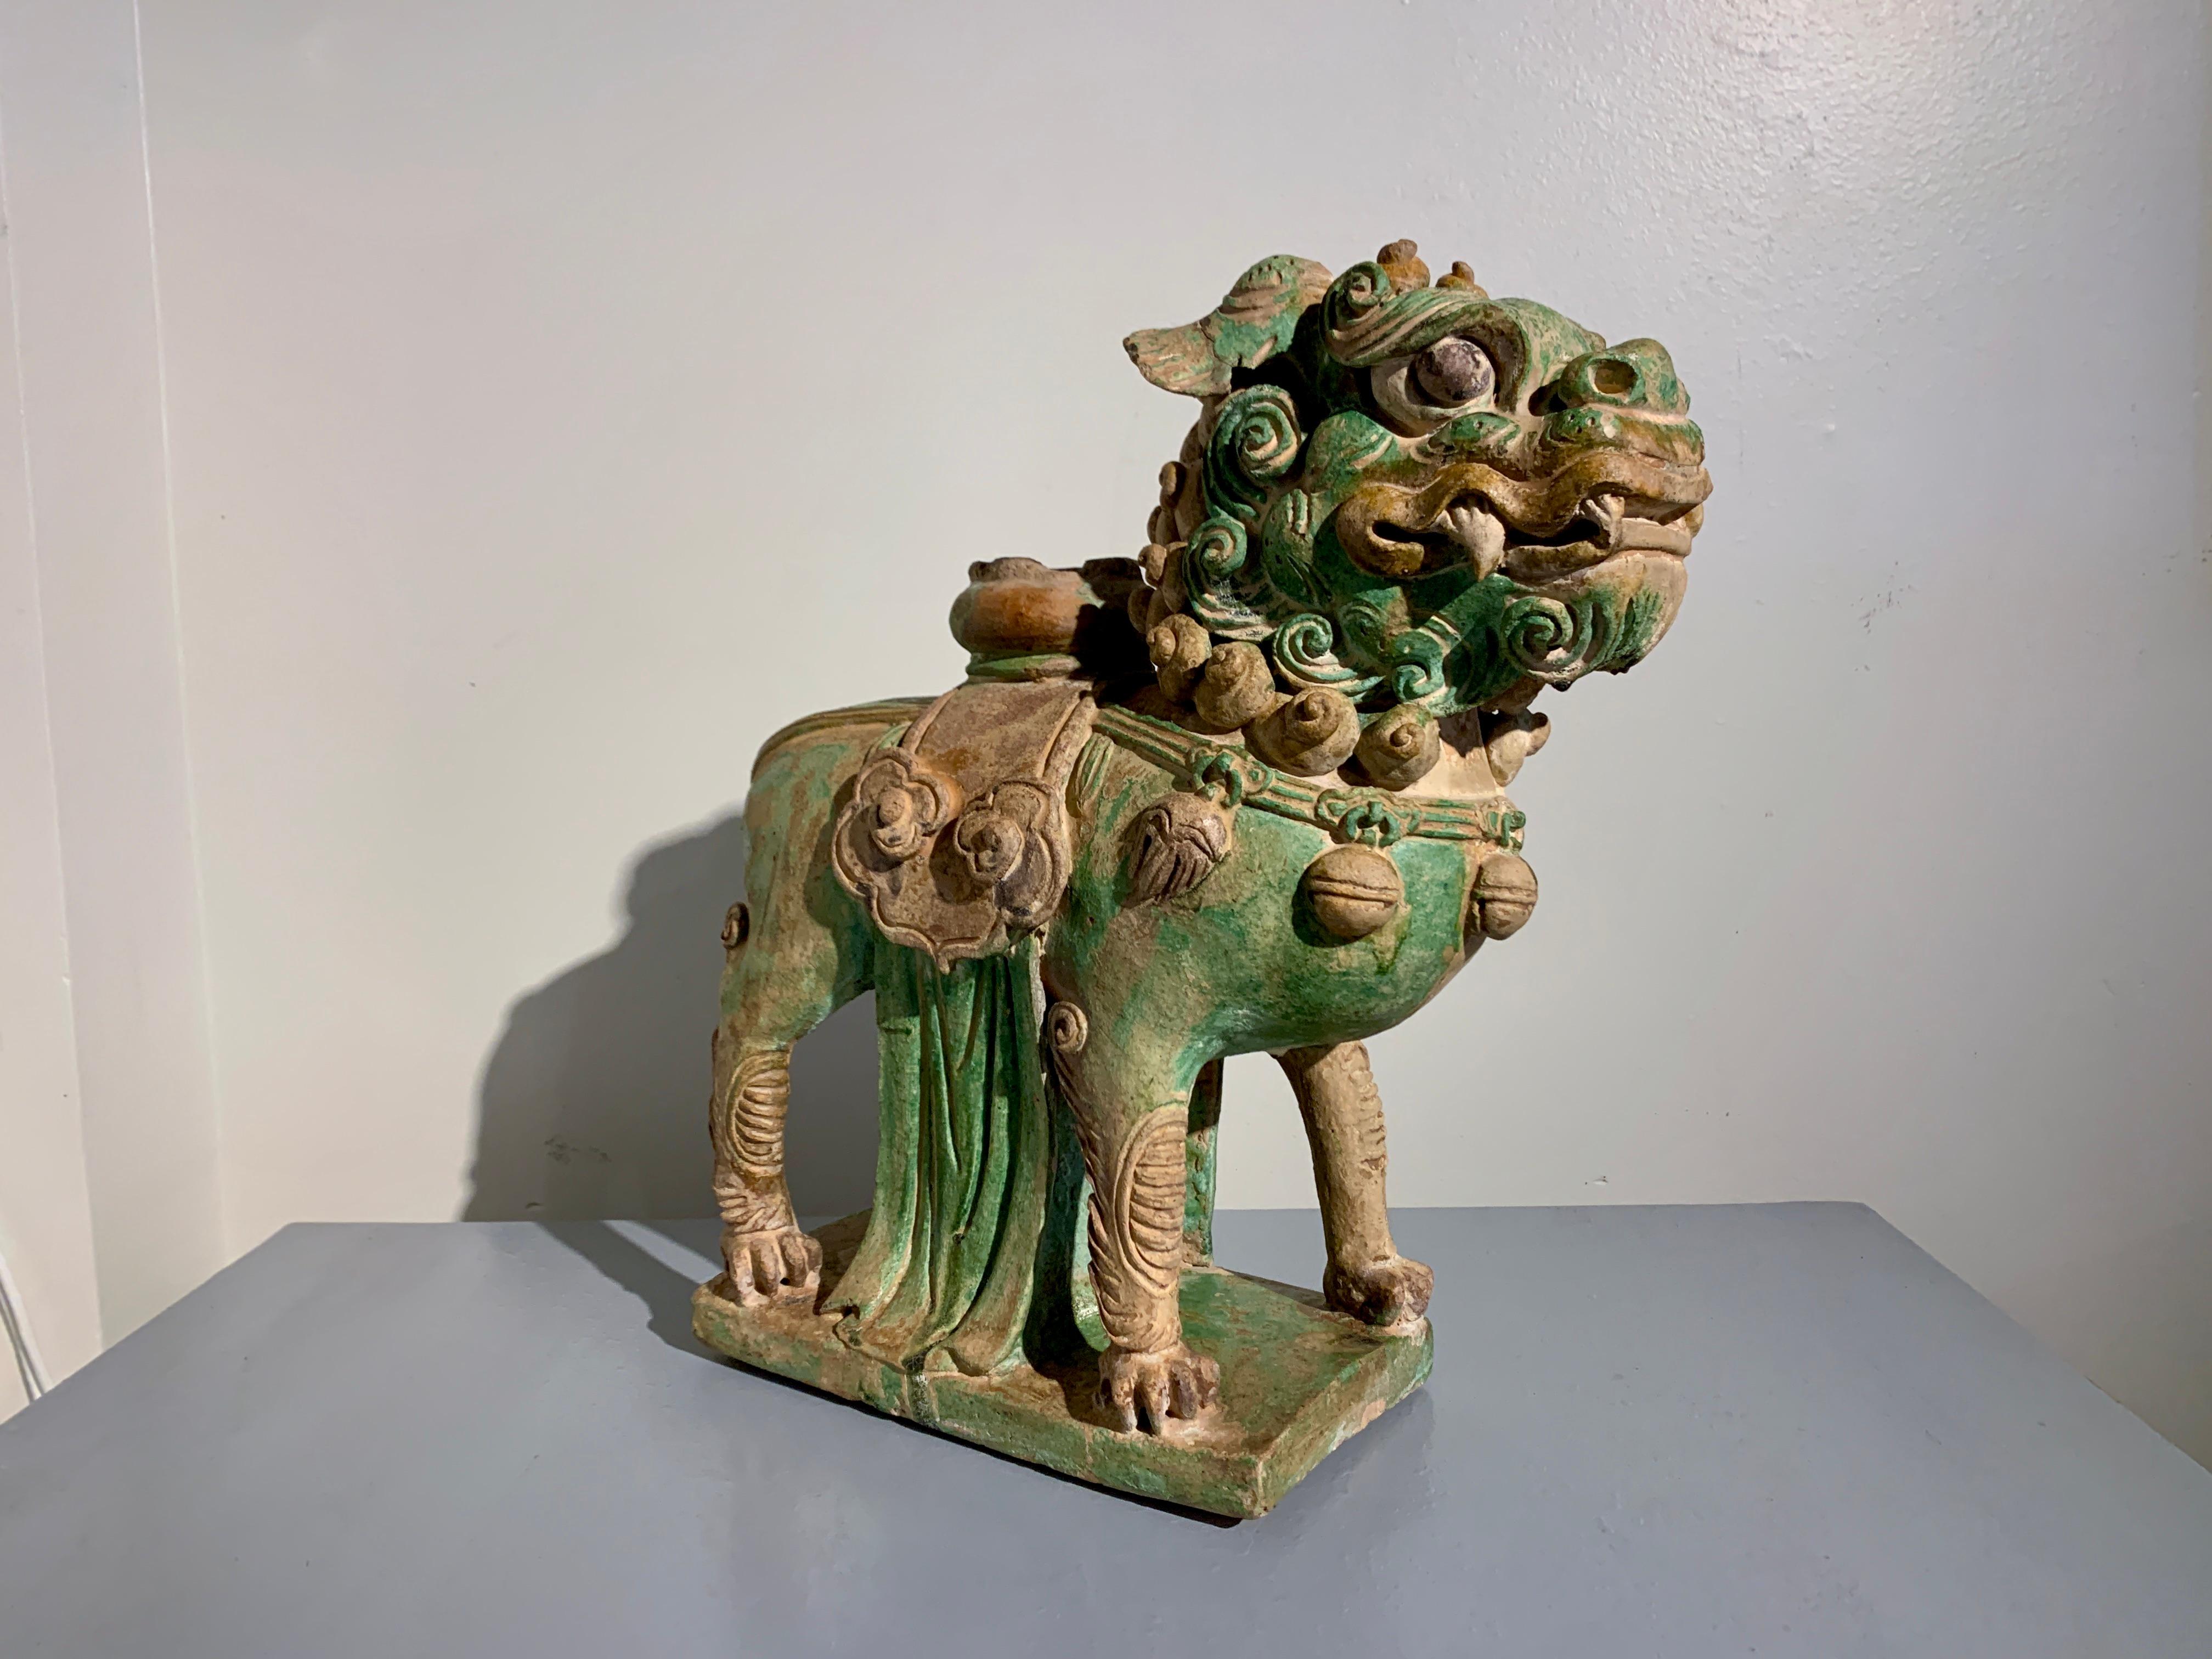 Fired Chinese Ming Dynasty Sancai Glazed Pottery Guardian Lion, late 16th Century For Sale